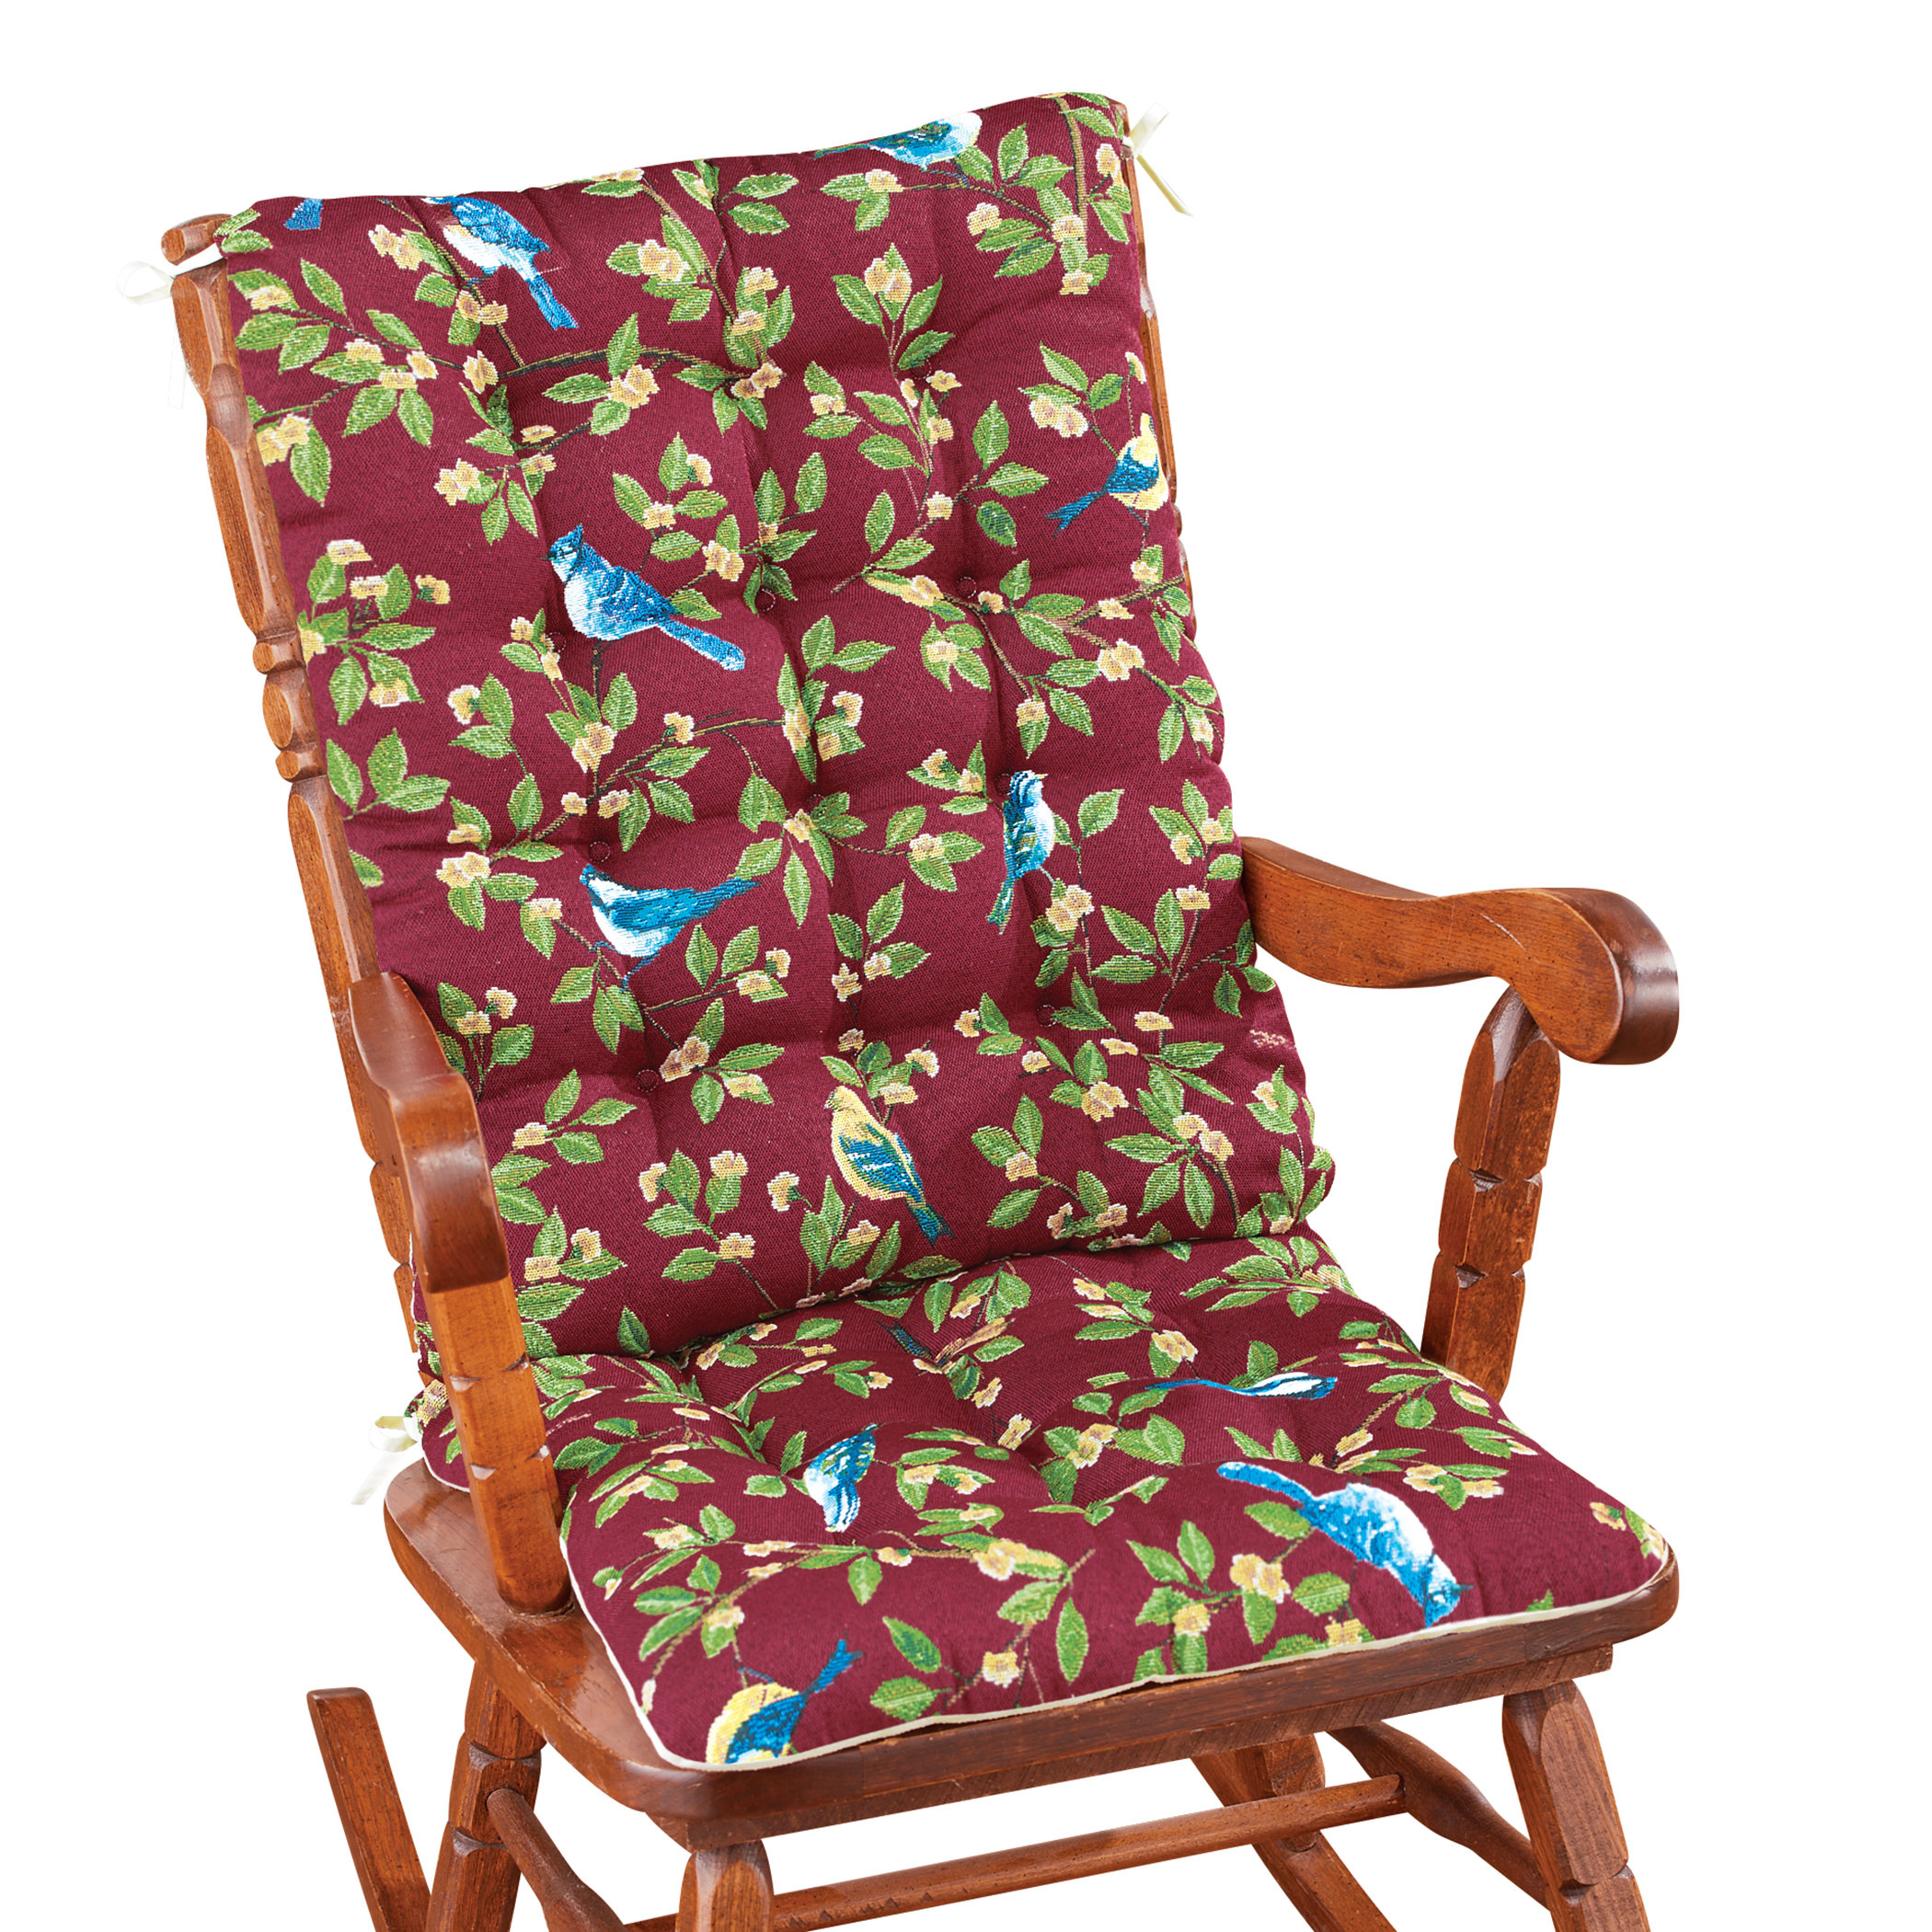 Sweet Home Collection Rocking Chair Cushion Set - Teal